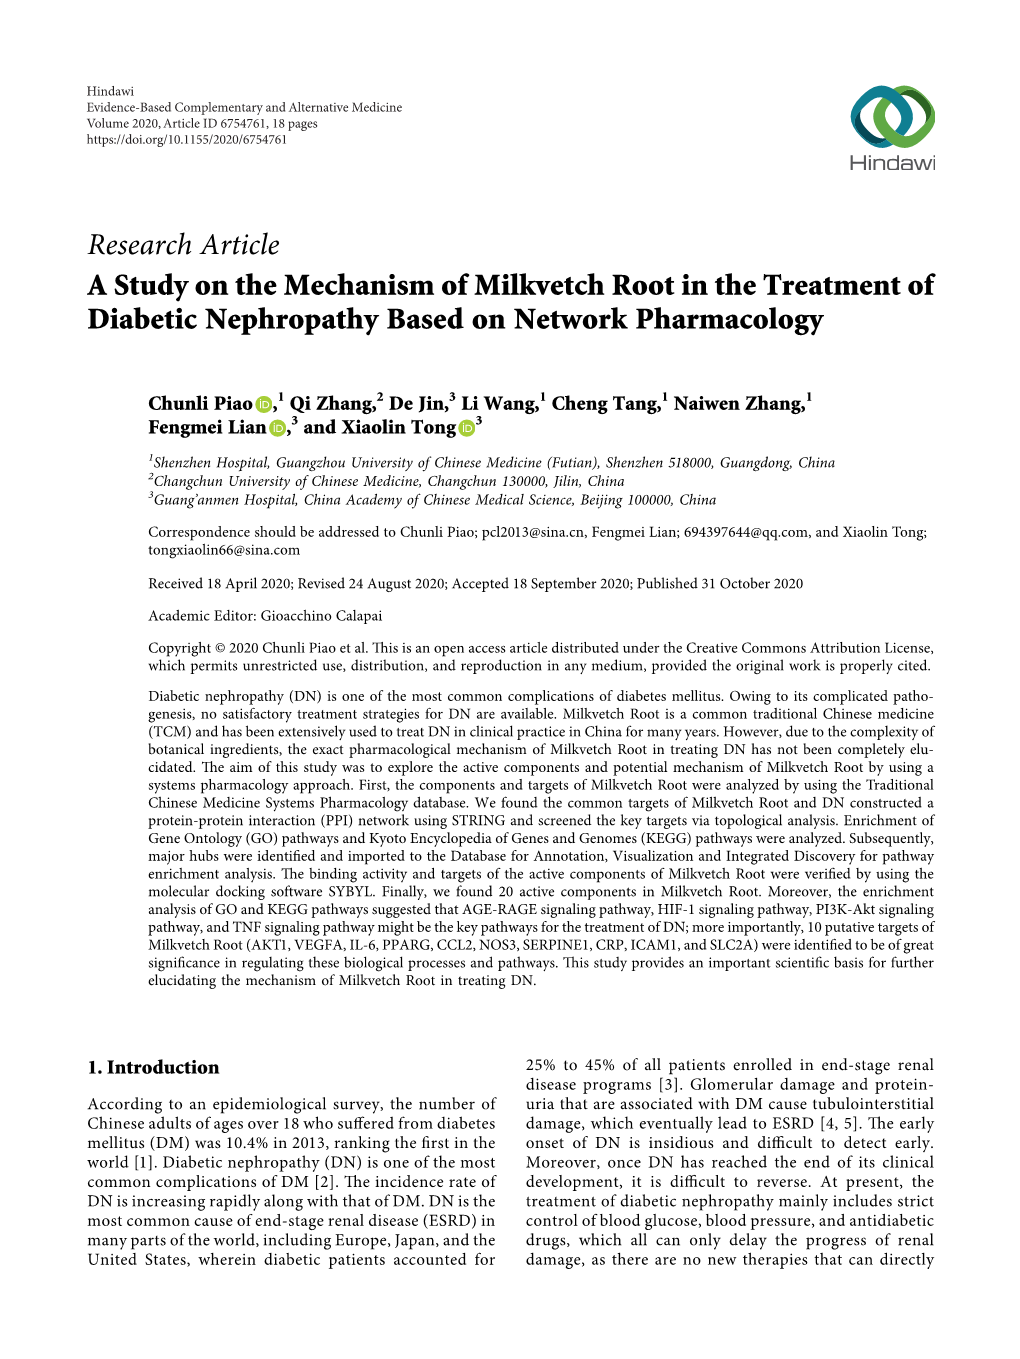 Research Article a Study on the Mechanism of Milkvetch Root in the Treatment of Diabetic Nephropathy Based on Network Pharmacology